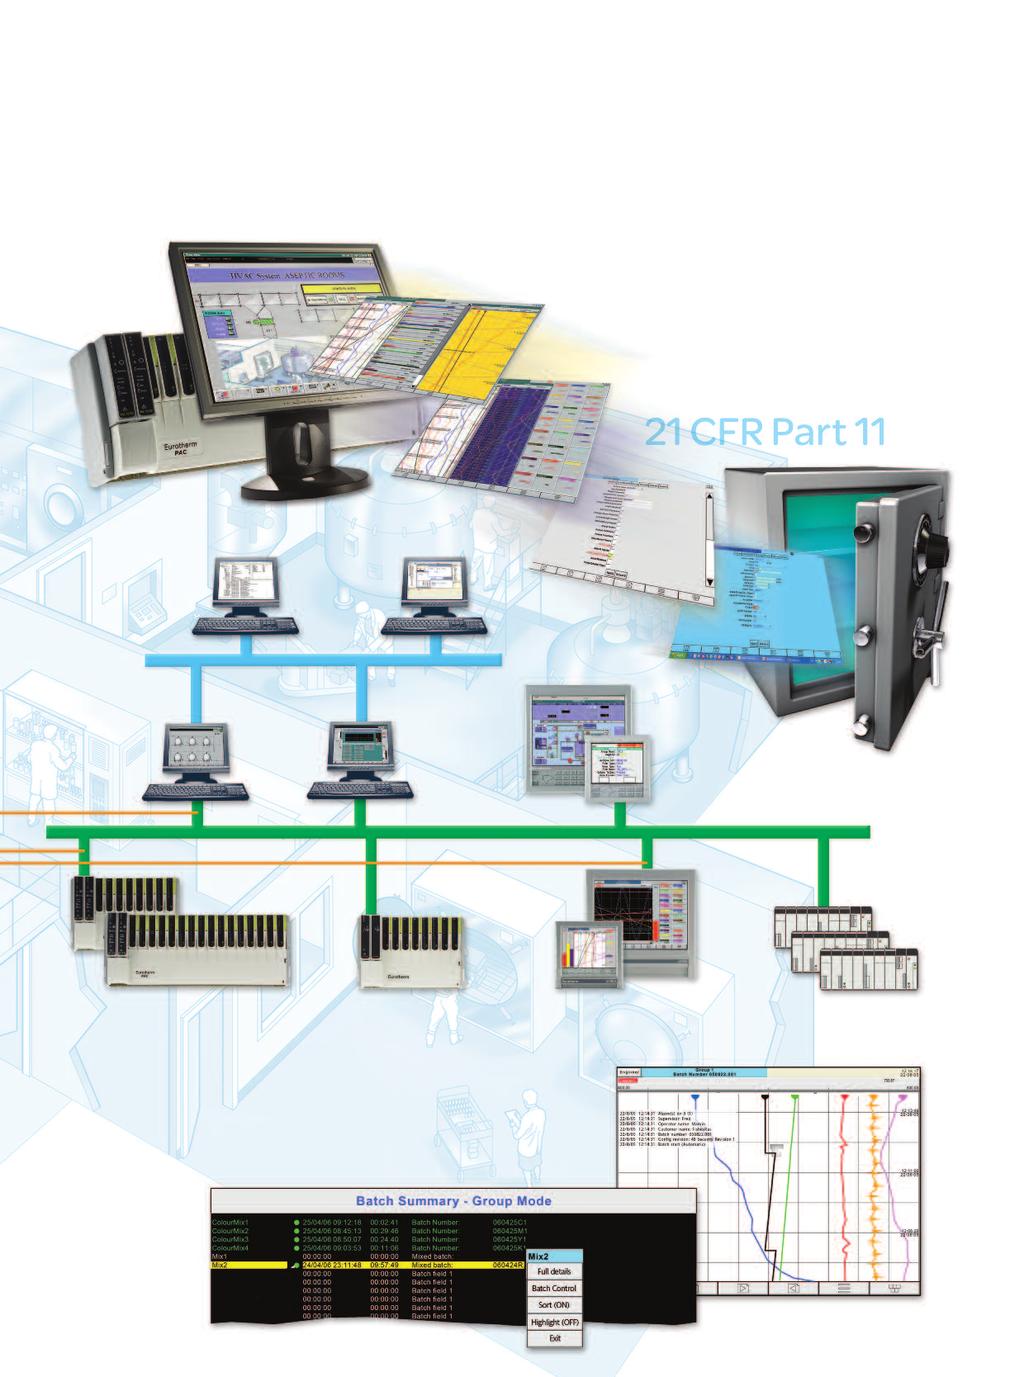 Redundant OPC Servers Redundant Data Acquisition at Local Level Operations Viewer Data Ethernet OPC Client Operations Server EYCON Visual Supervisor Ethernet